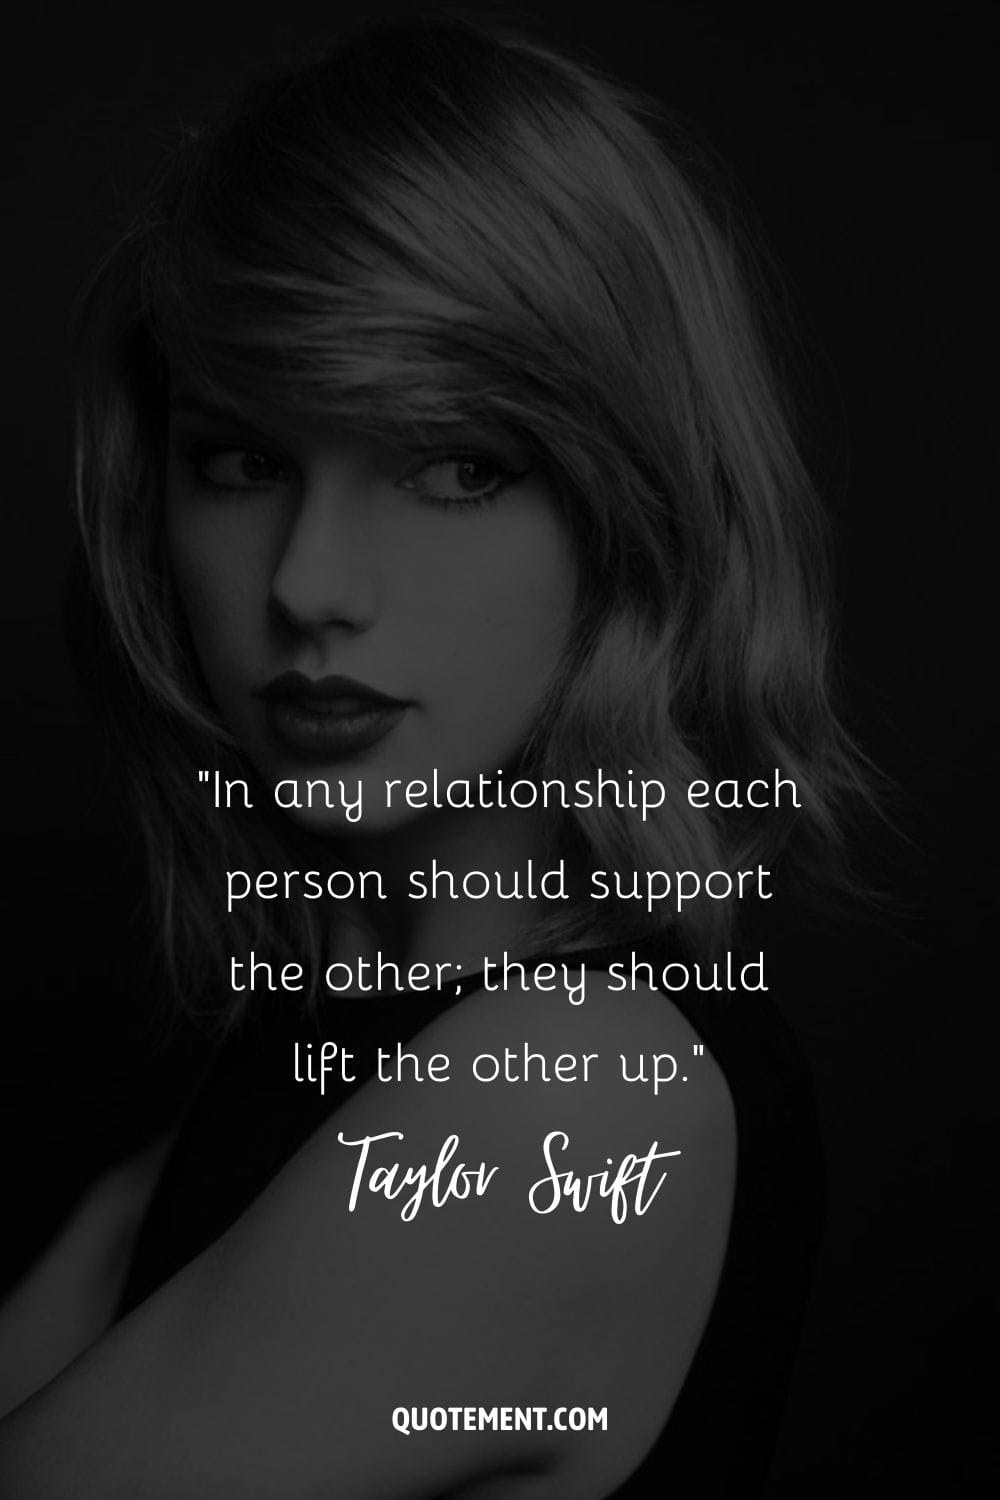 “In any relationship each person should support the other; they should lift the other up.” ― Taylor Swift